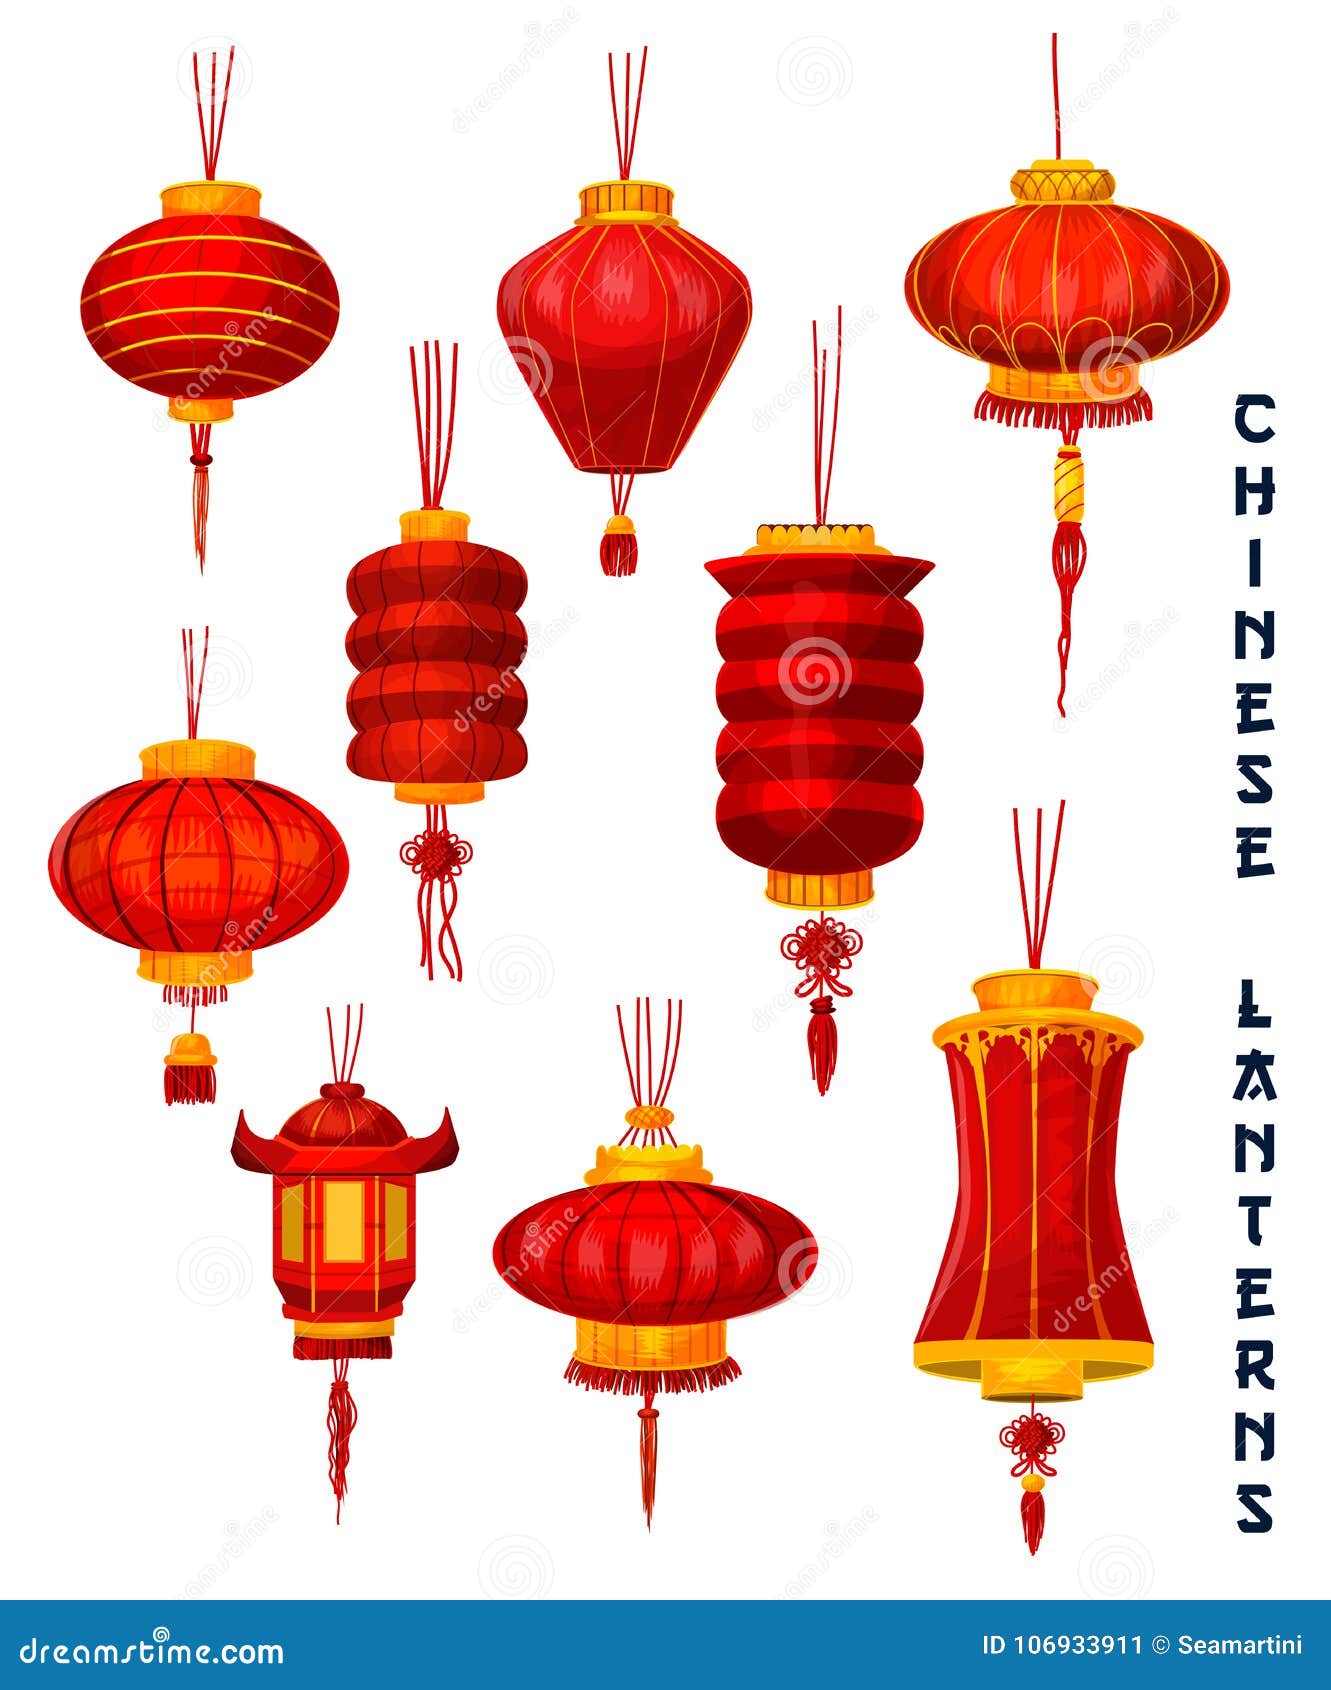 Quasimoon 8 Pack 12 inch Red Chinese New Year Prosperity Paper Lantern, Hanging Combo Set, Size: 12 Lanterns